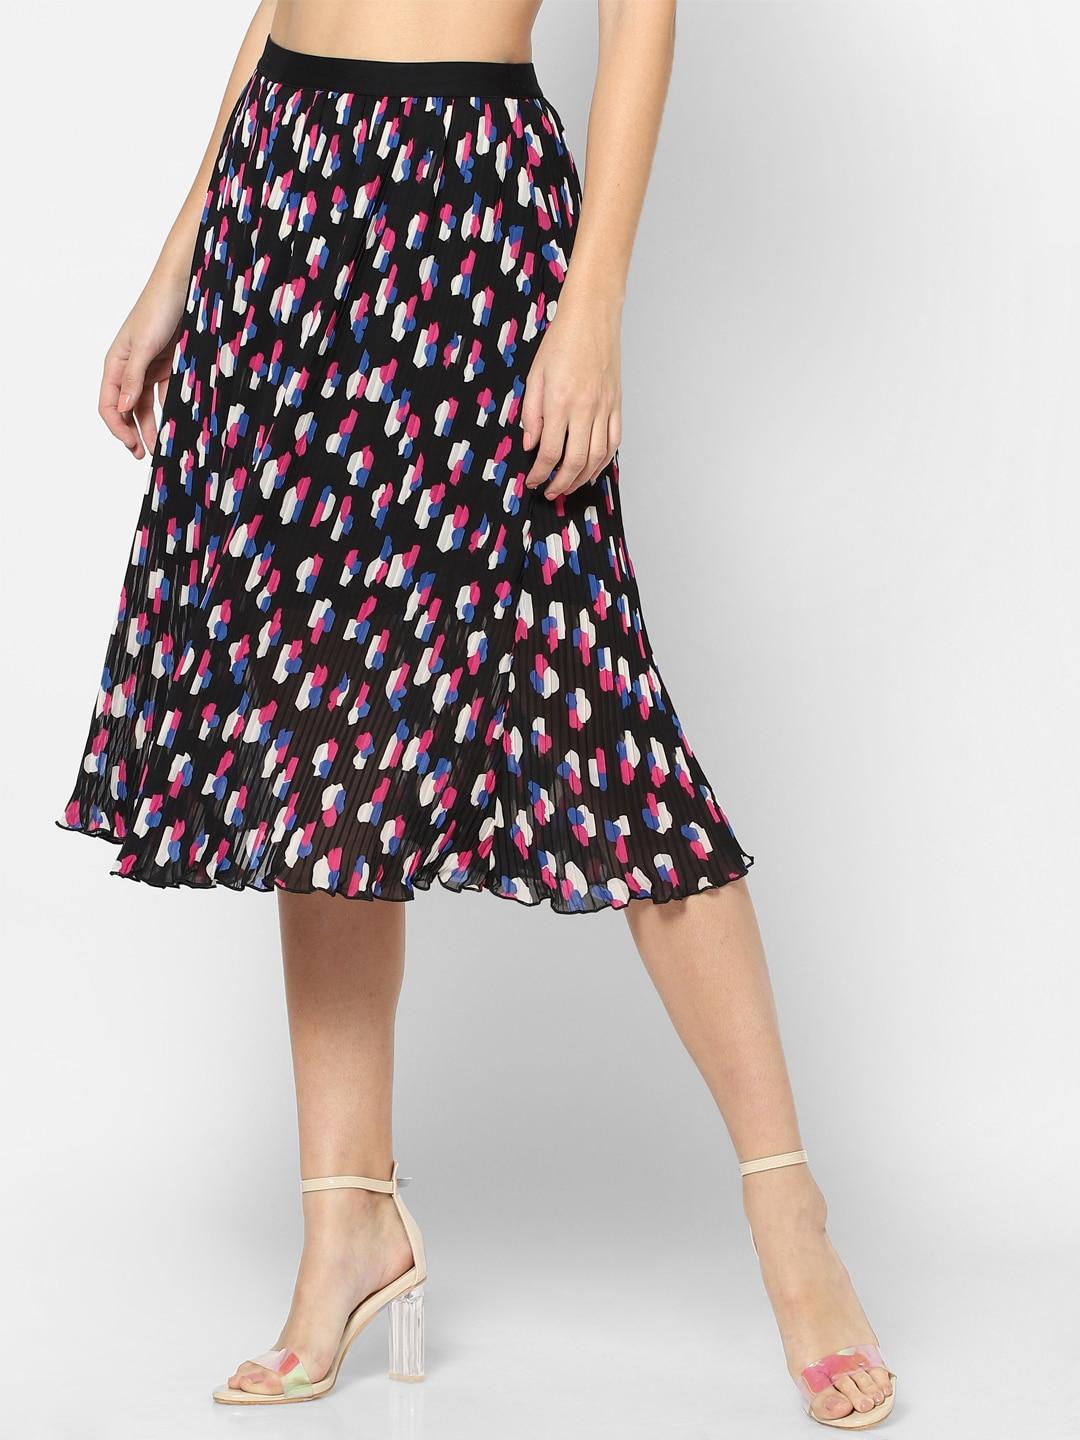 ONLY Women Black & Pink Printed A-Line Midi Skirt